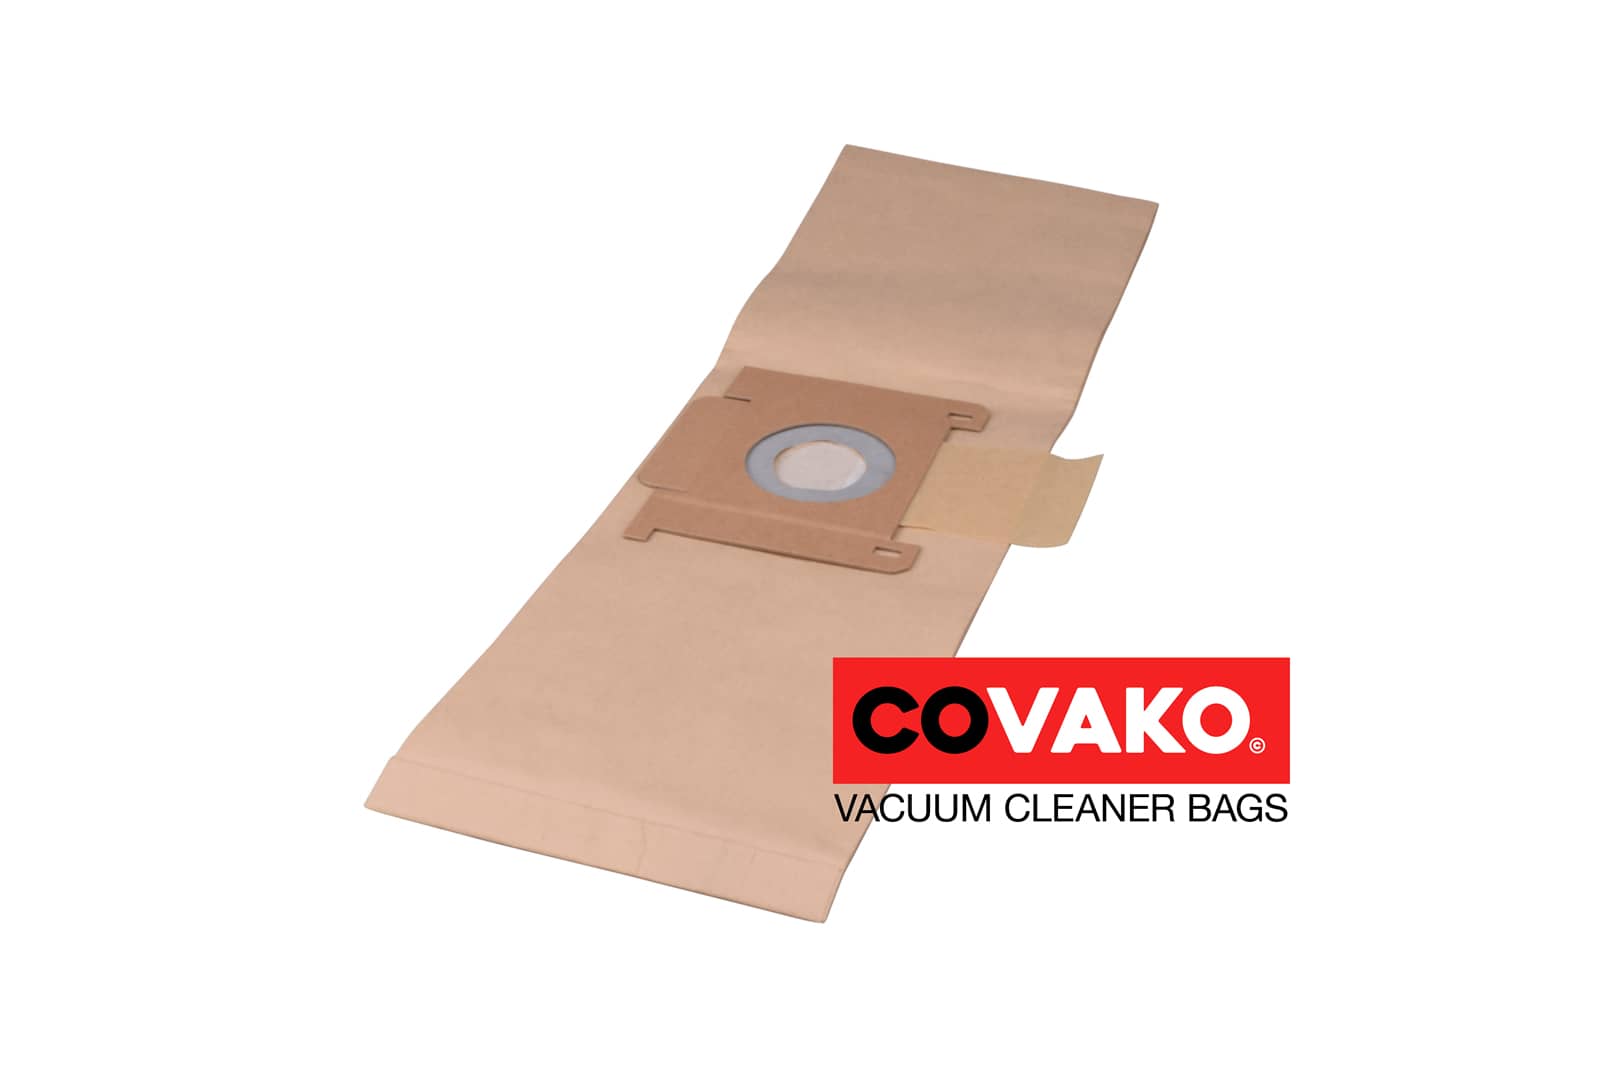 Ivac Steady Extra 6.0 / Paper - Ivac vacuum cleaner bags